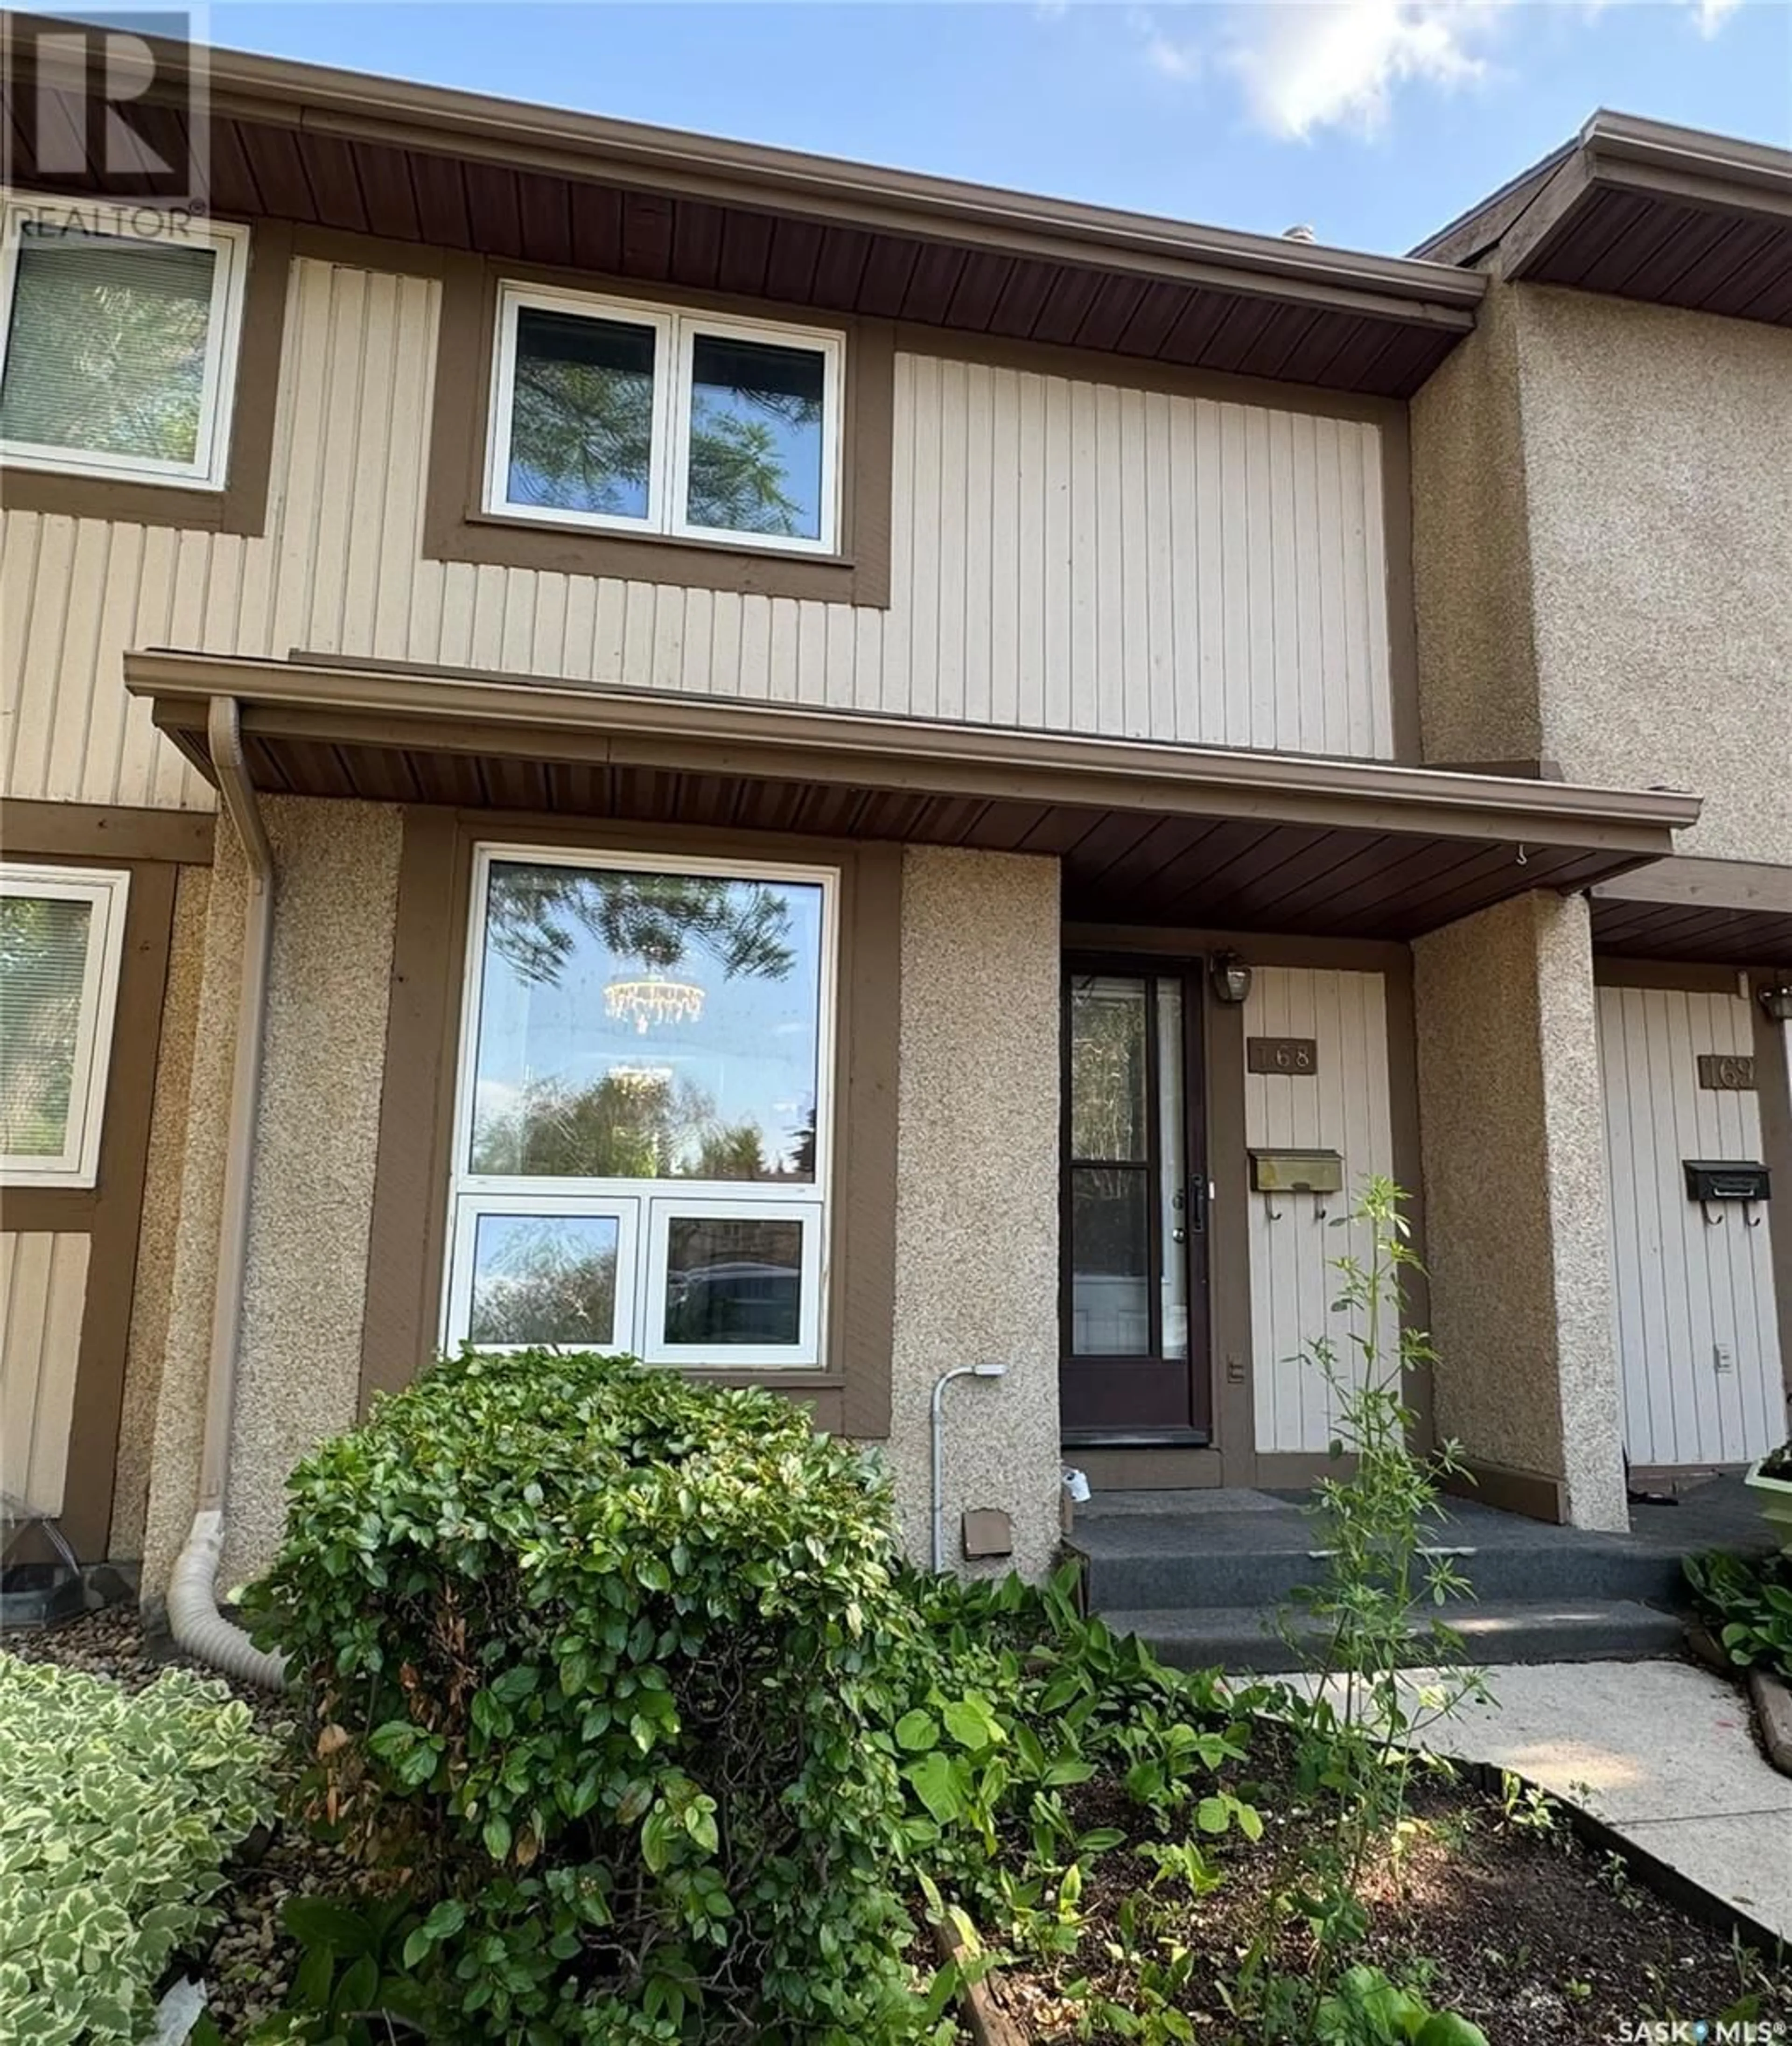 A pic from exterior of the house or condo for 168 1128 McKercher DRIVE, Saskatoon Saskatchewan S7H4Y7